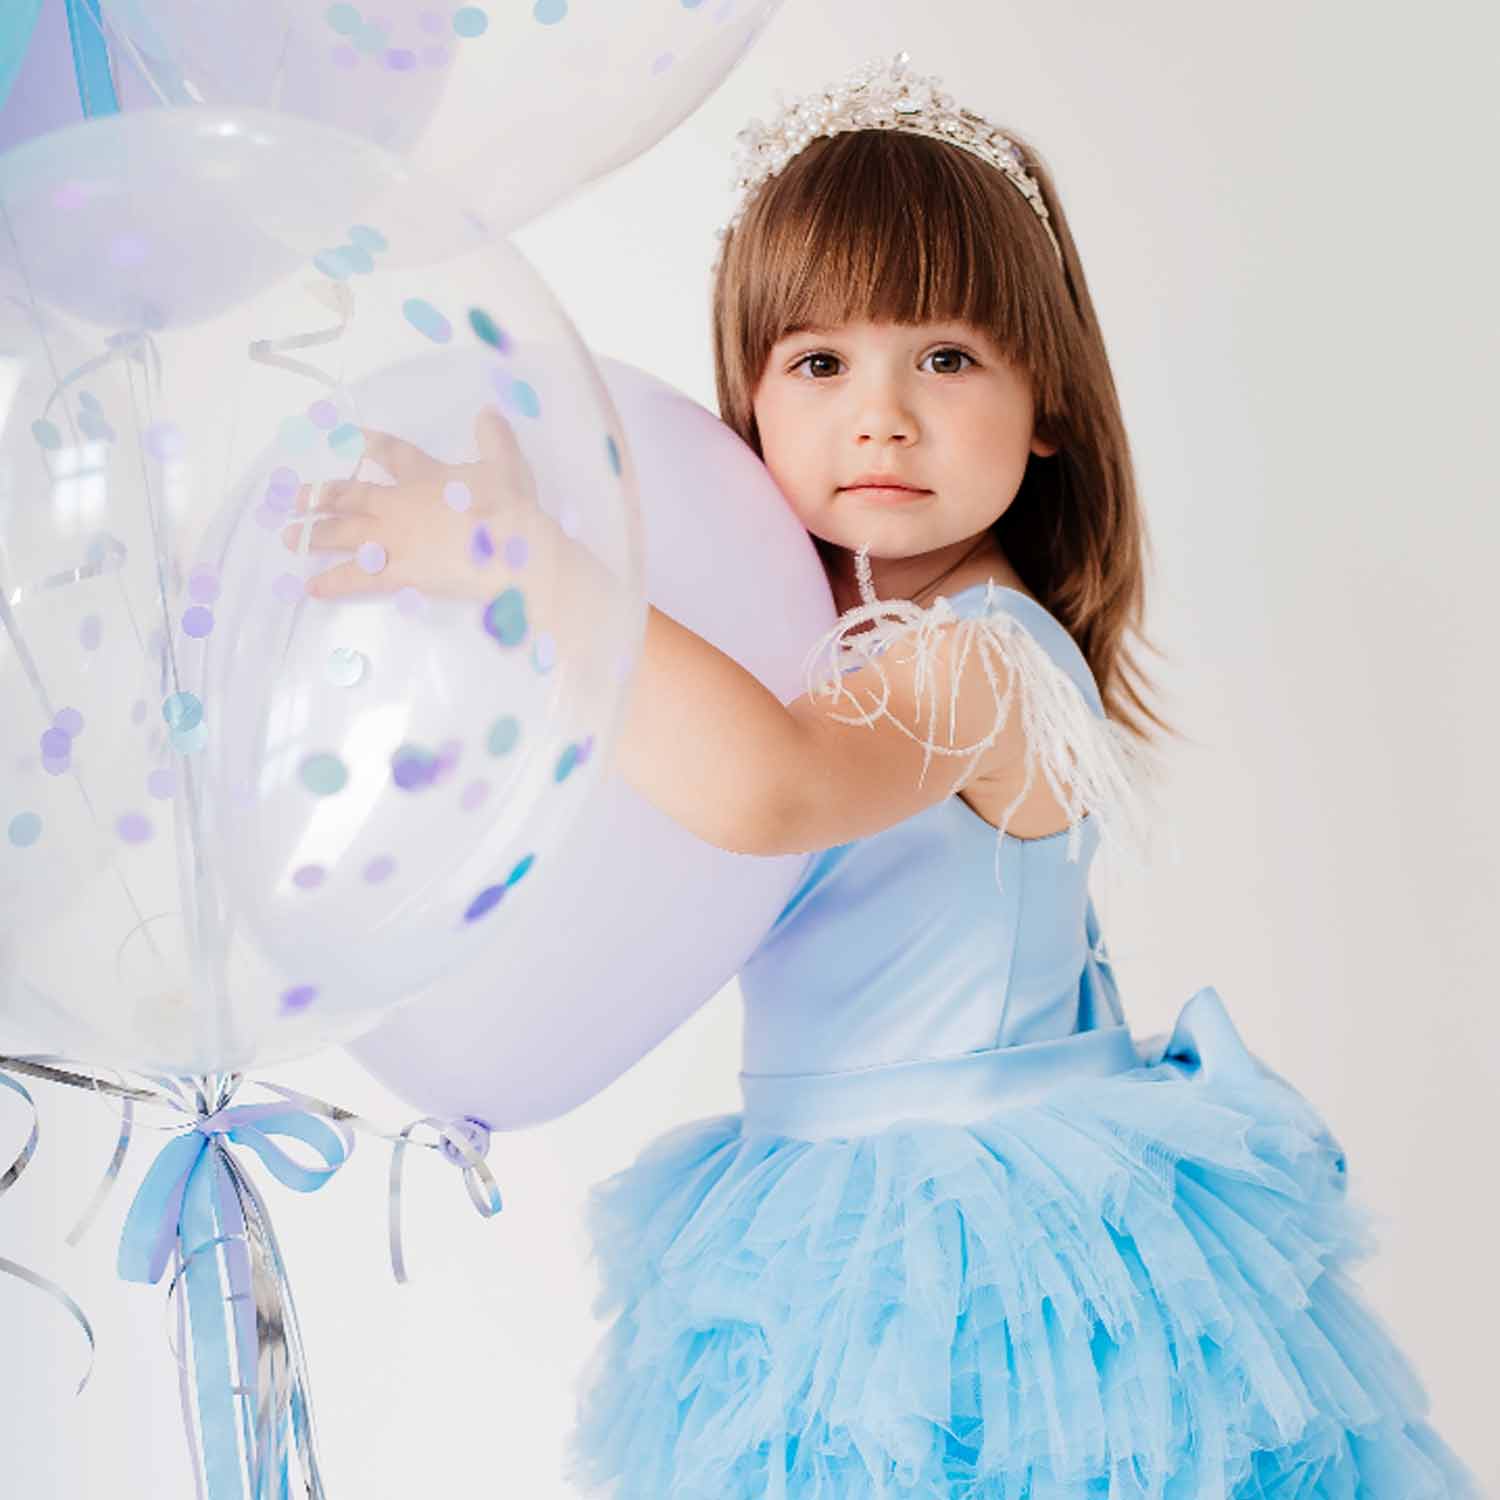 Third birthday party ideas for boys and girls